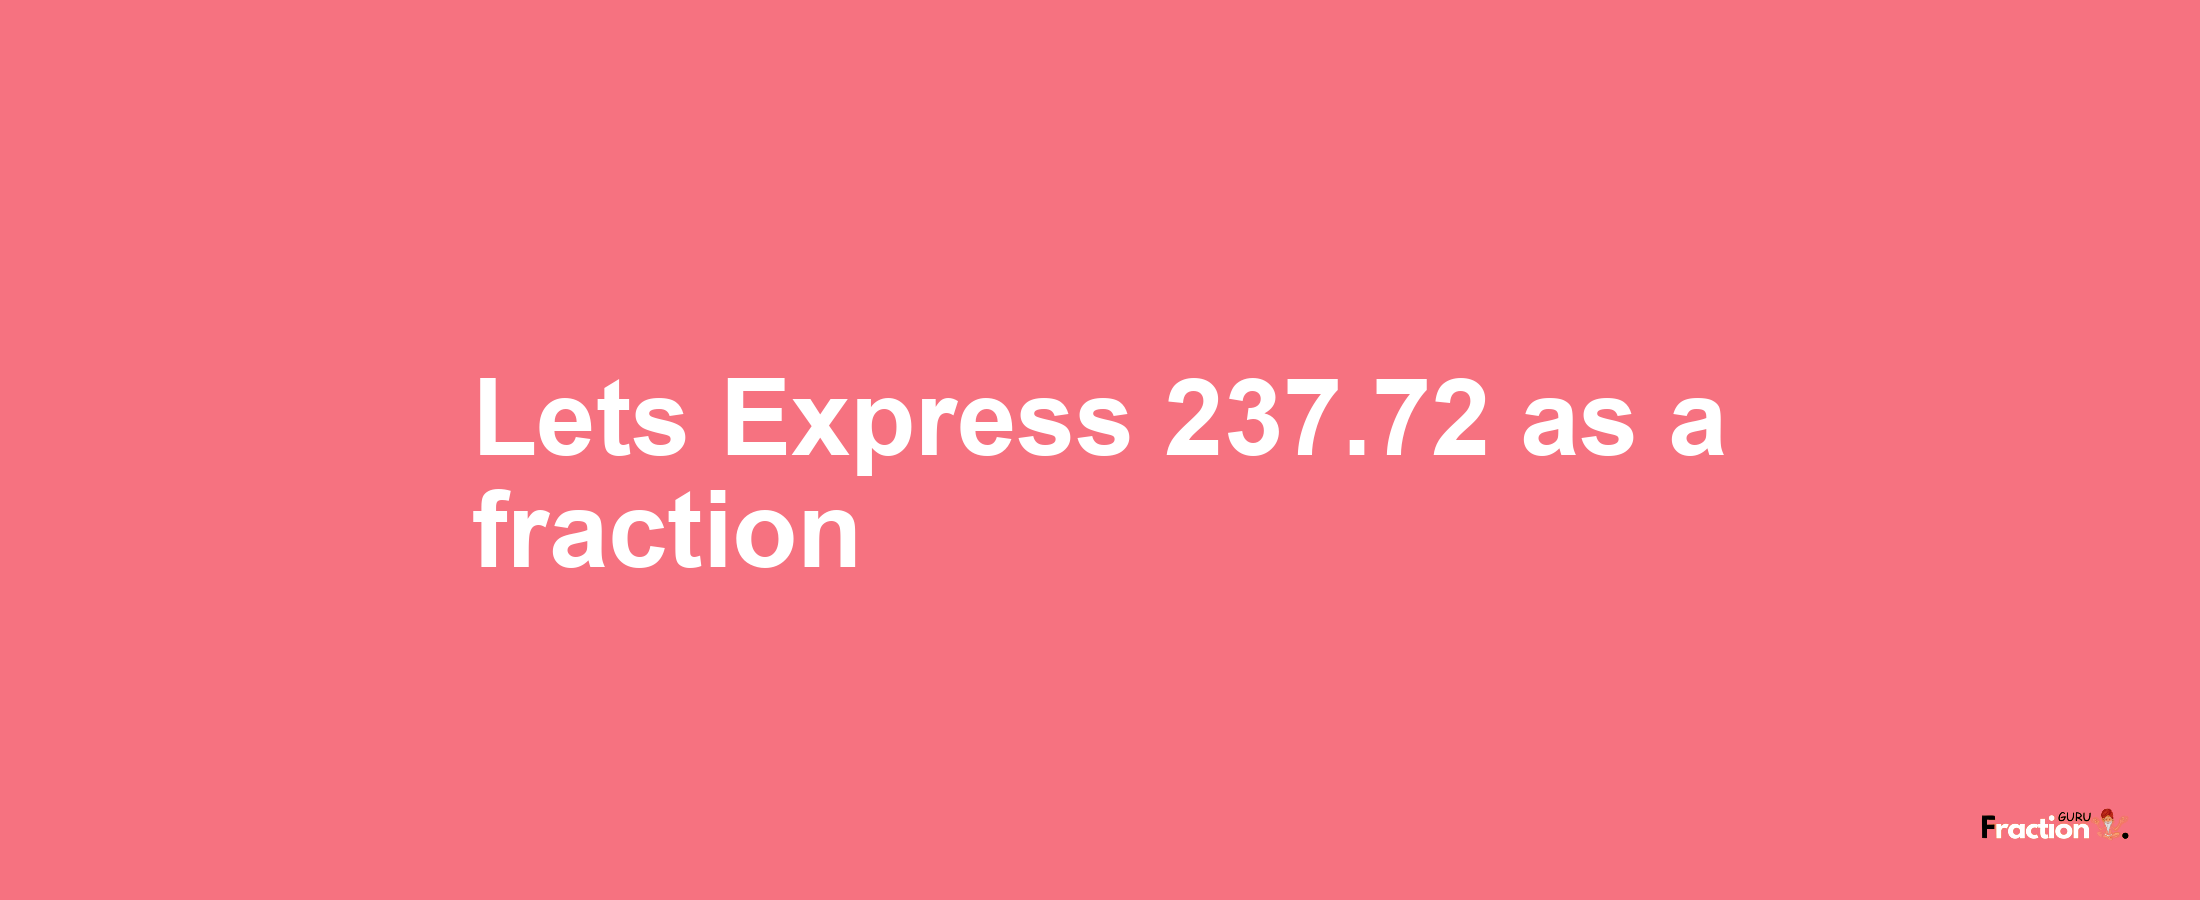 Lets Express 237.72 as afraction